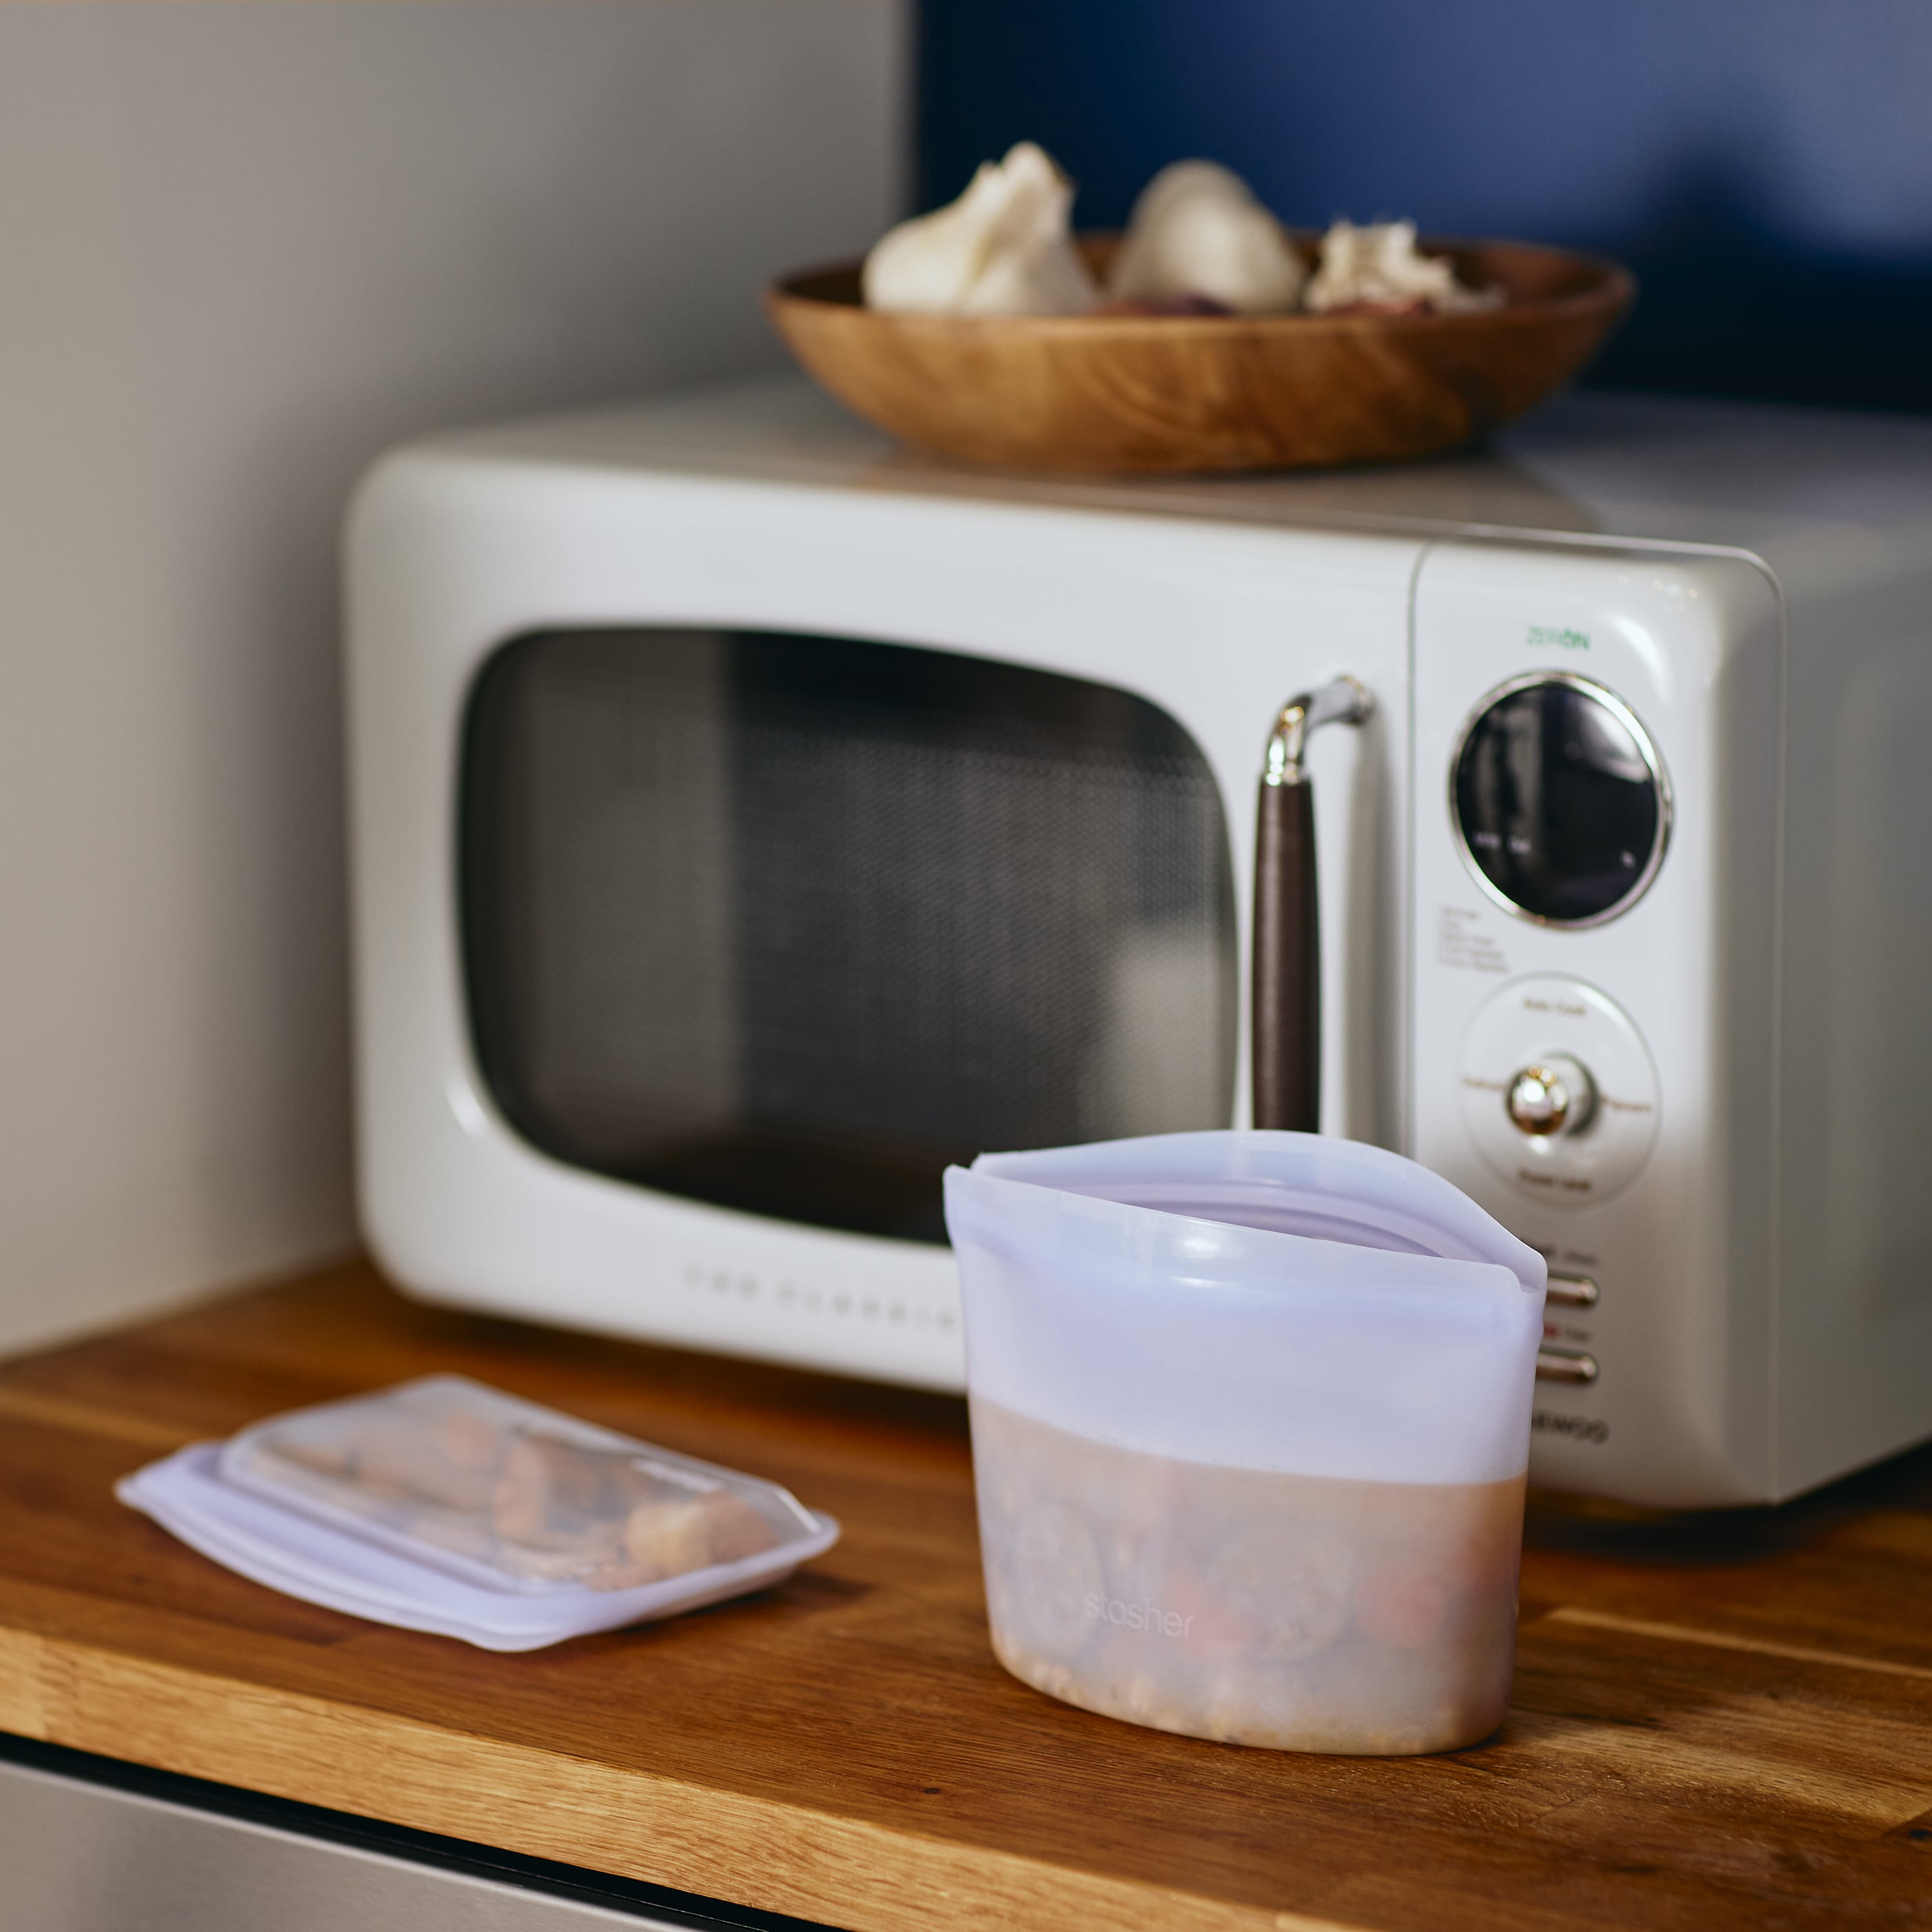 seas the day: stasher reusable silicone bags and bowls